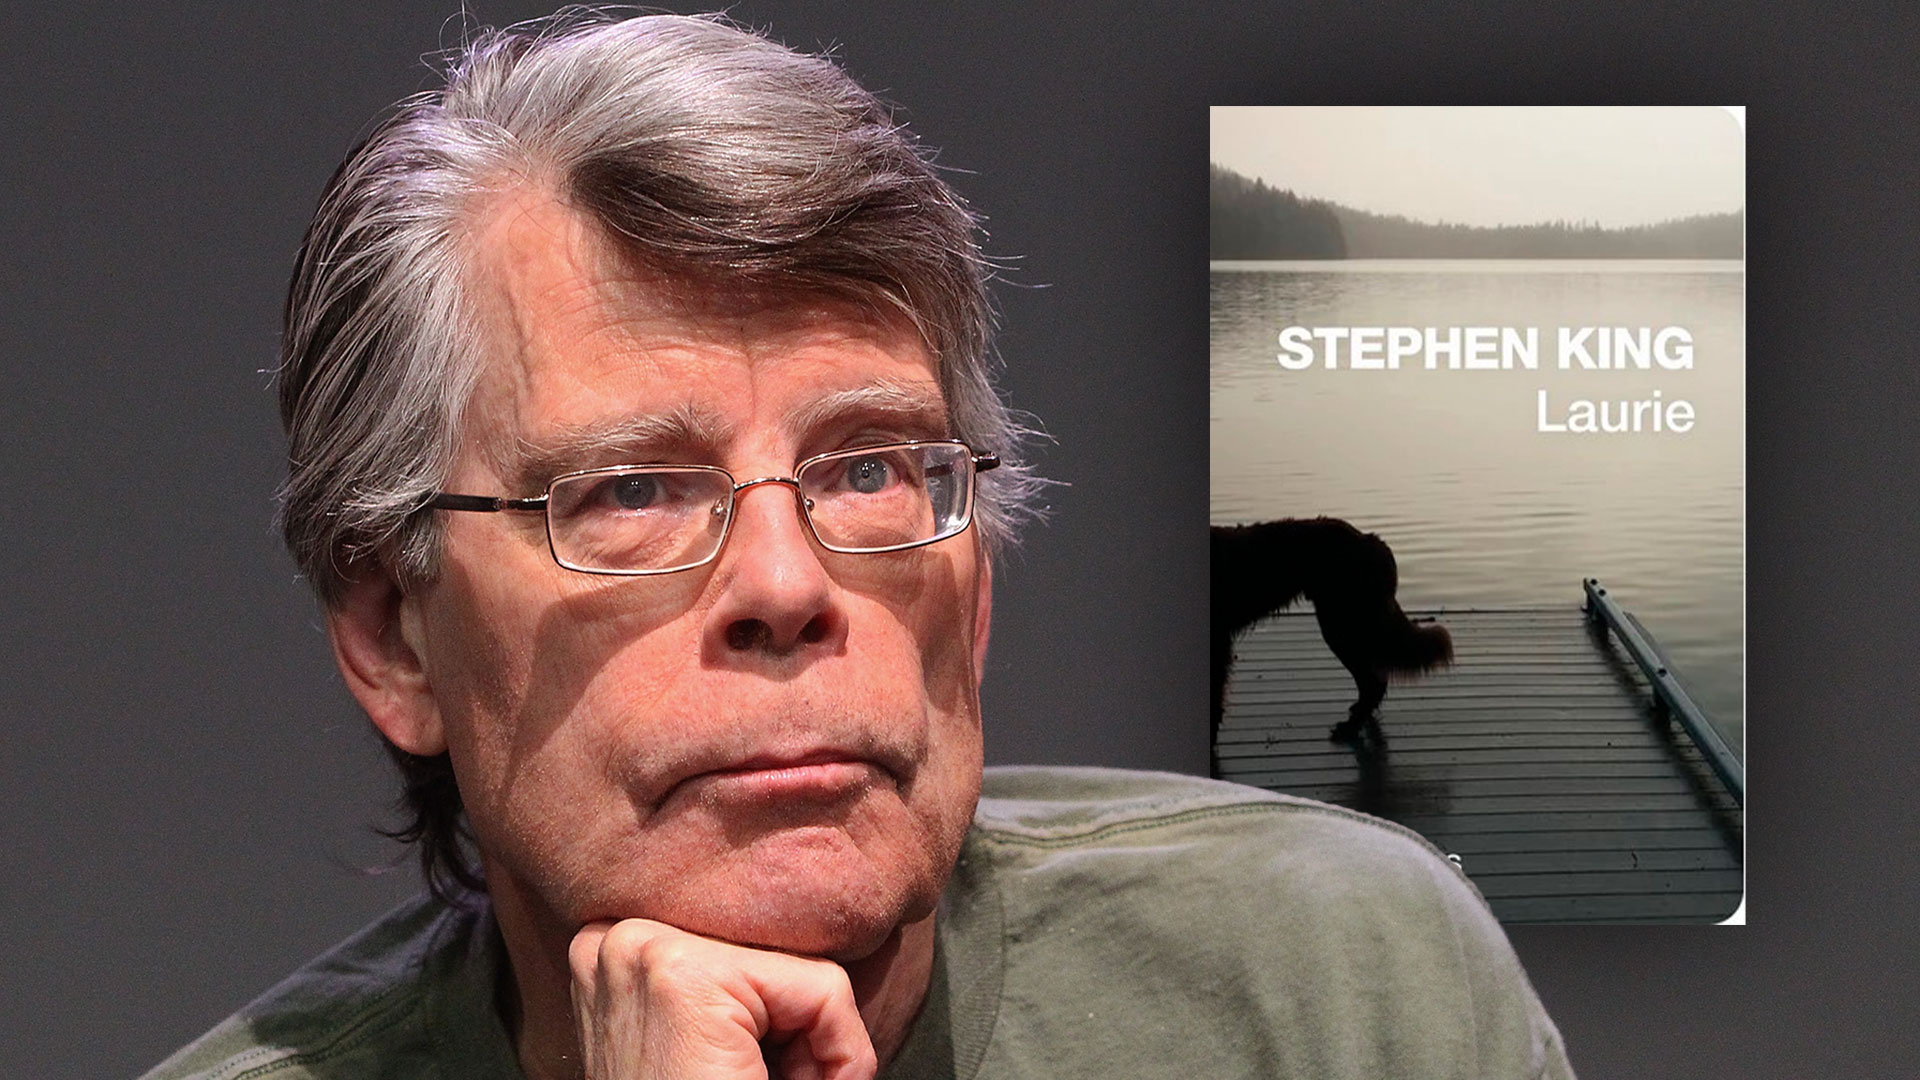 Stephen King laurie